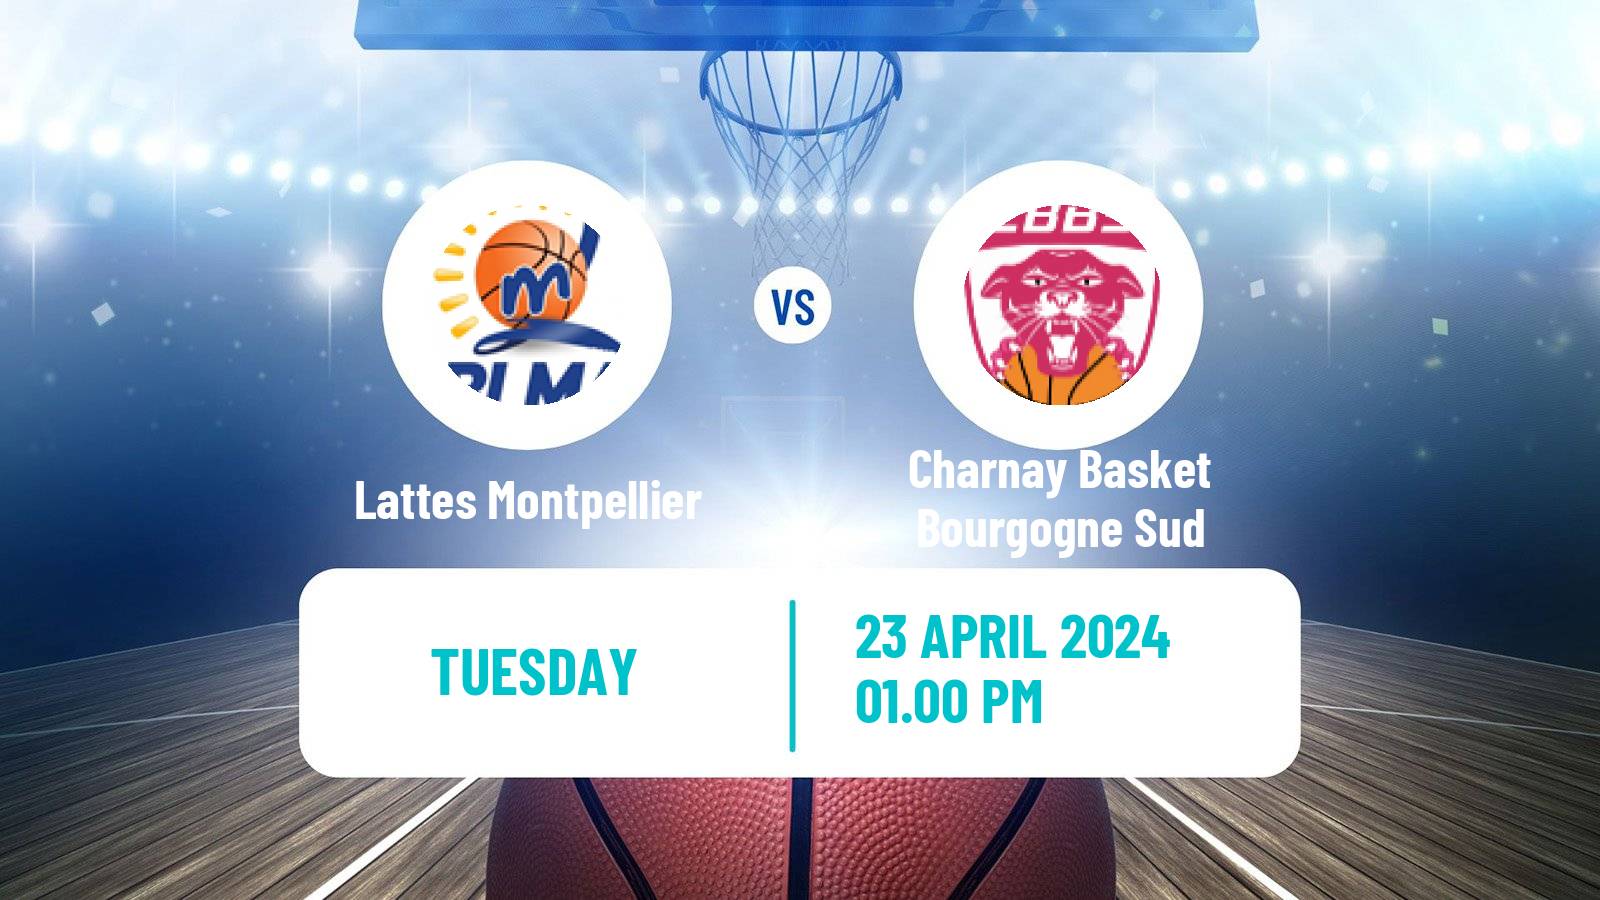 Basketball French LFB Lattes Montpellier - Charnay Basket Bourgogne Sud